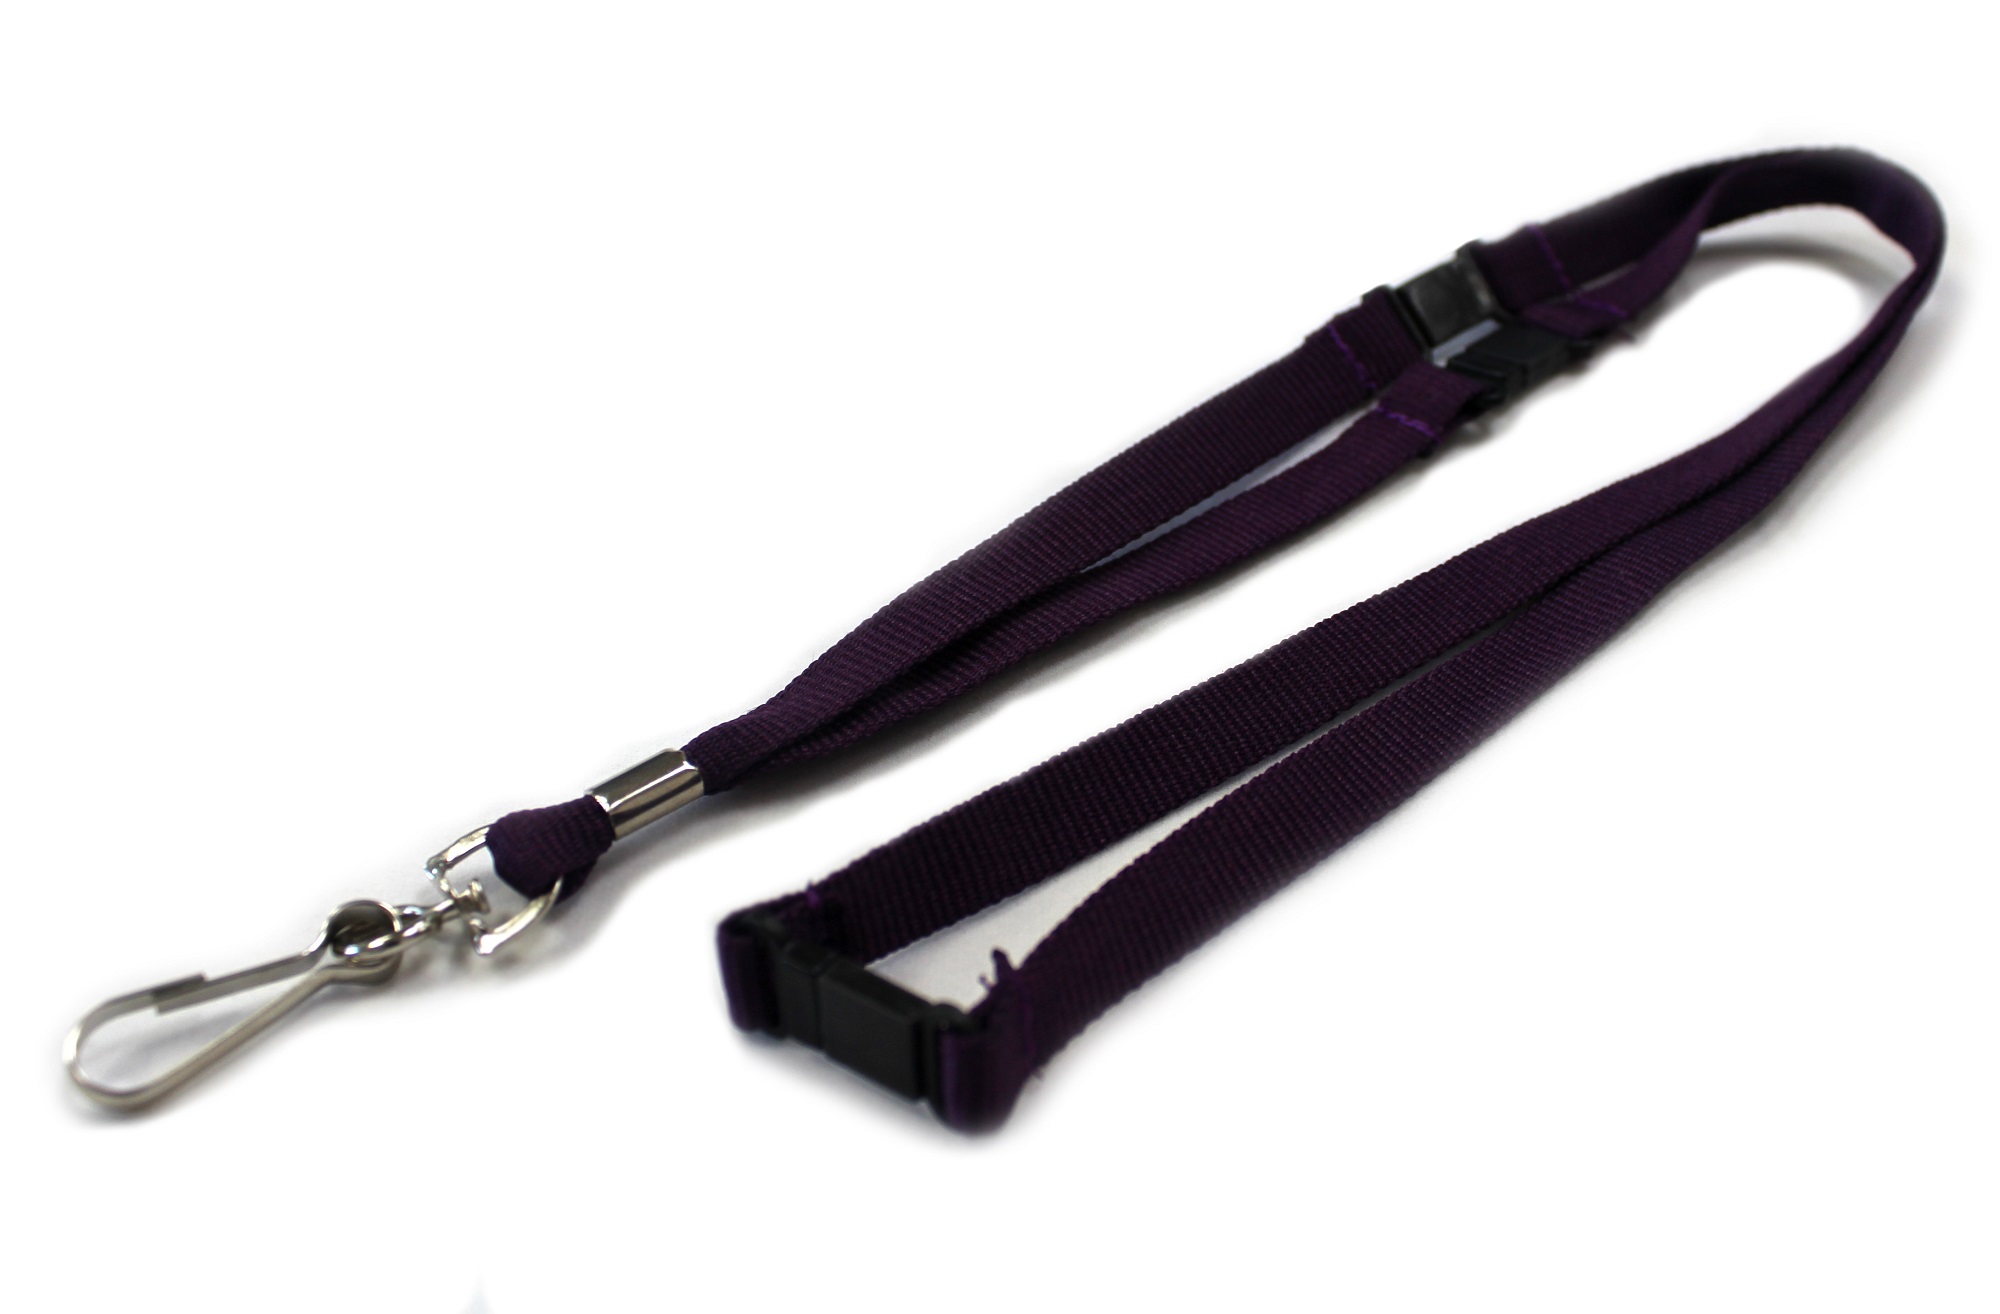 An image of 10mm lanyards in purple with 3 health and safety breakaways